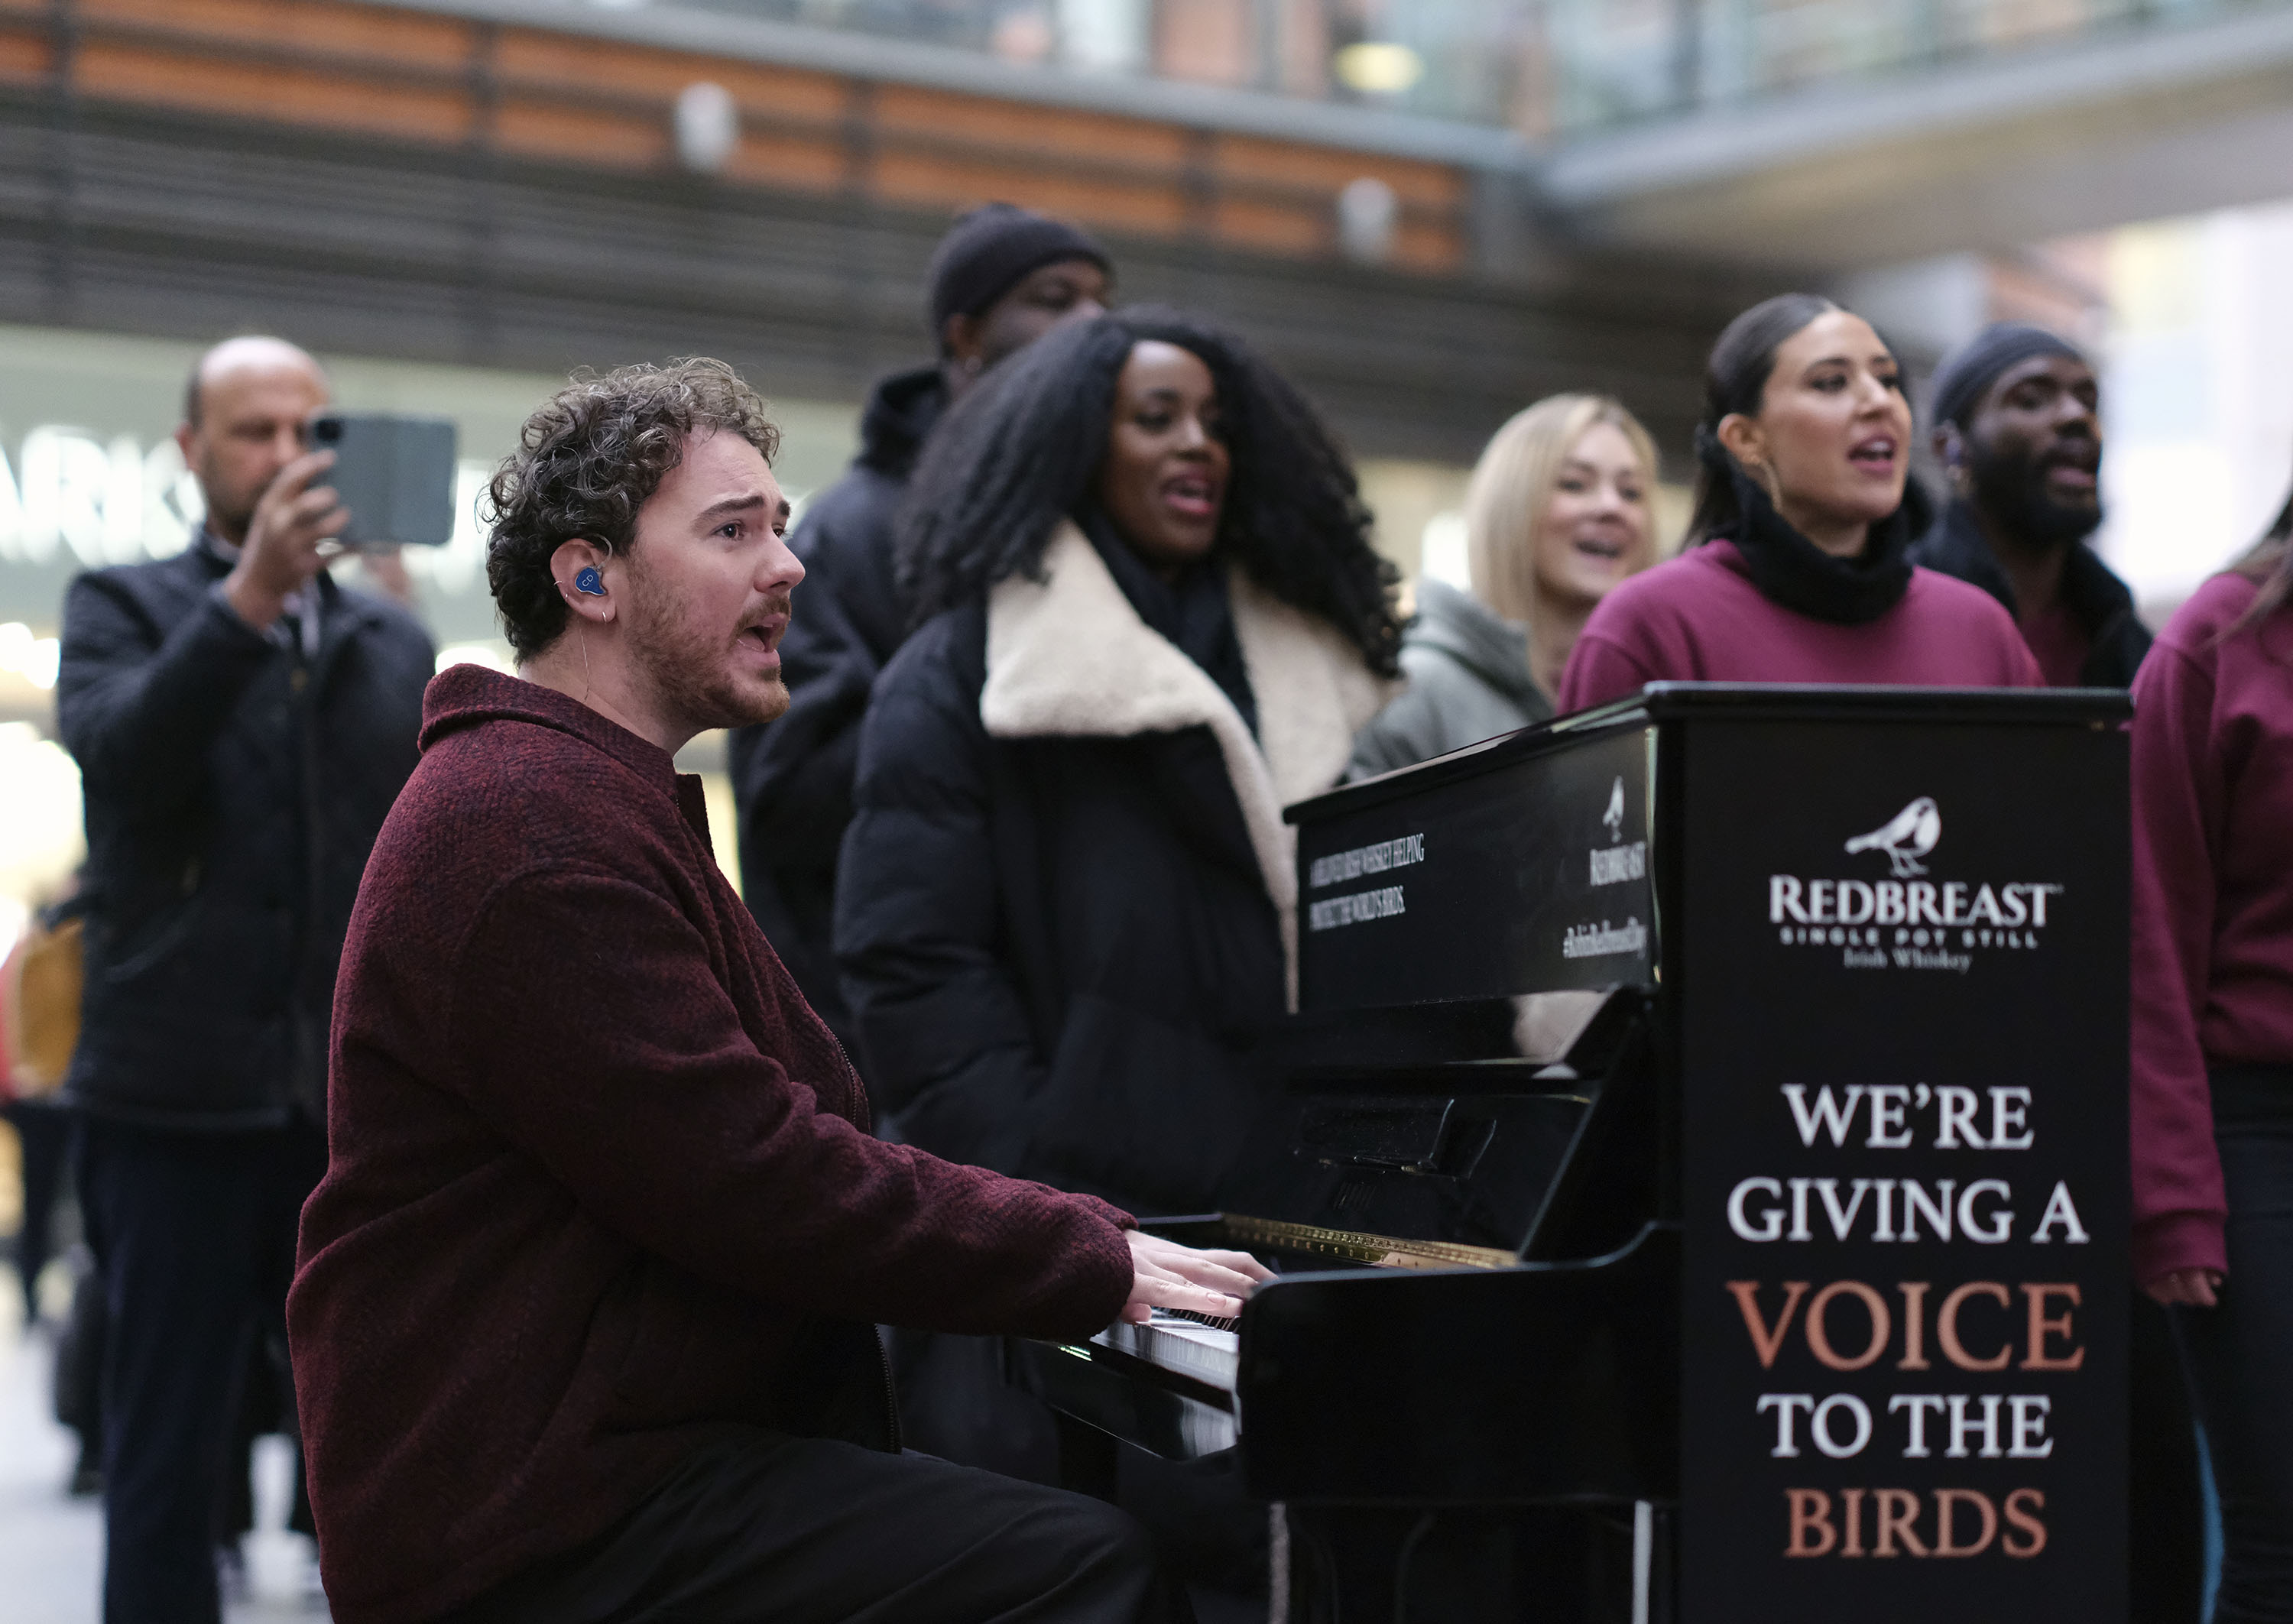 Irish singer-songwriter Cian Ducrot and a choir surprise London commuters with a performance to raise awareness for the loss of morning bird song and the decline in many bird populations at Victoria Station on Thursday, Nov. 16, 2023, in London. (Michael Knief/AP Images for Redbreast Irish Whiskey)